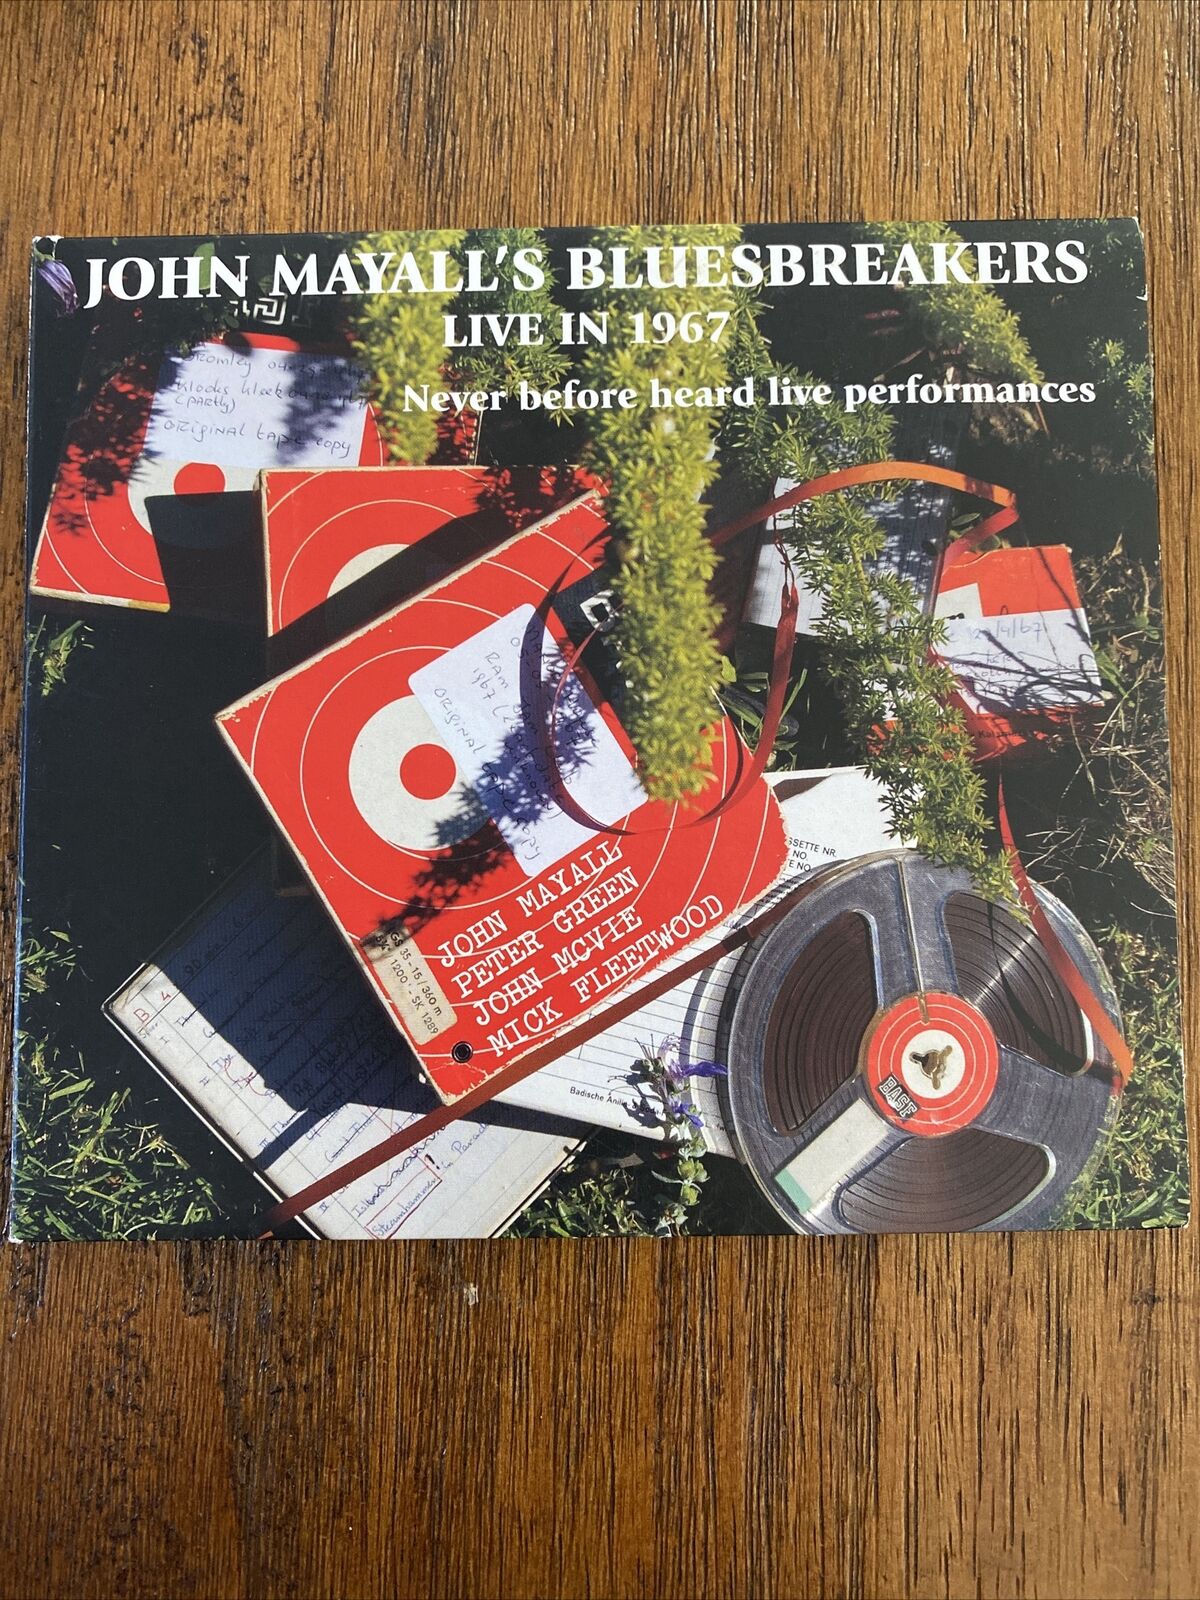 John Mayall's Bluesbreakers Live in 1967 Featuring Peter Green by Mick Fleetwood